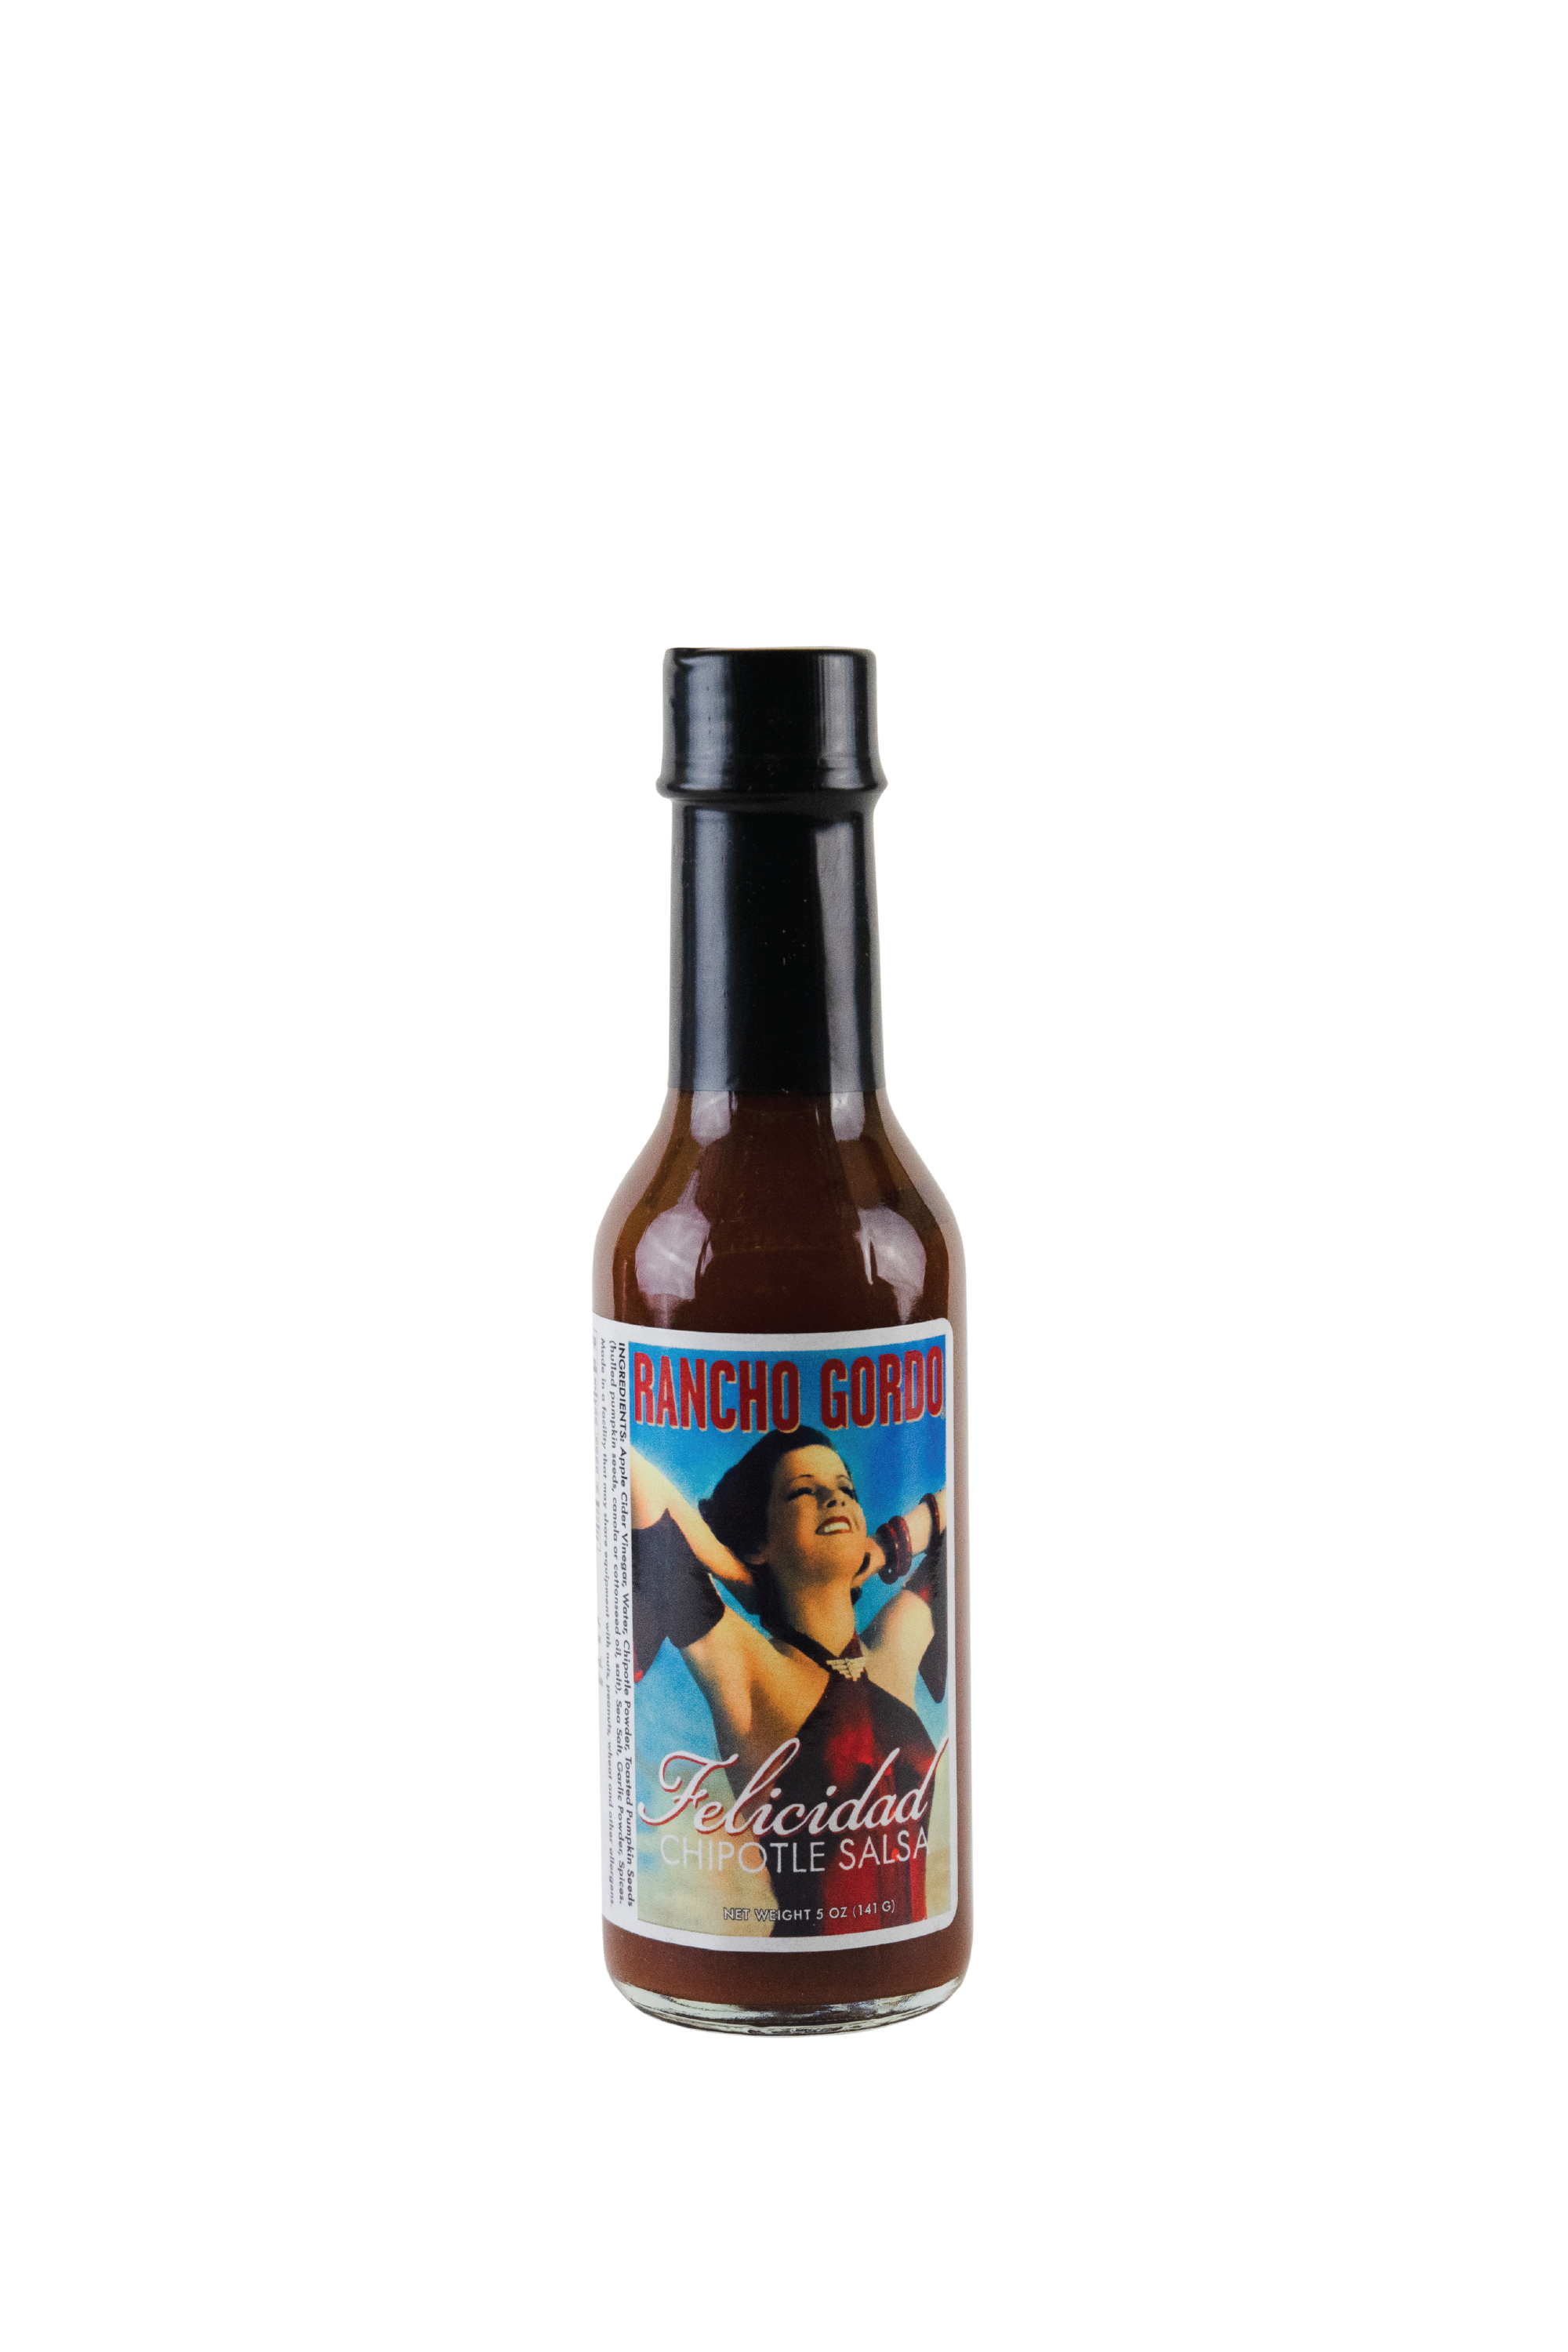 Image Of A 5 oz glass bottle Of Felicidad Chipotle Hot Sauce With a  White Background. Label art is of a dark haired woman in a red dress stretching her arms behind her head and smiling.